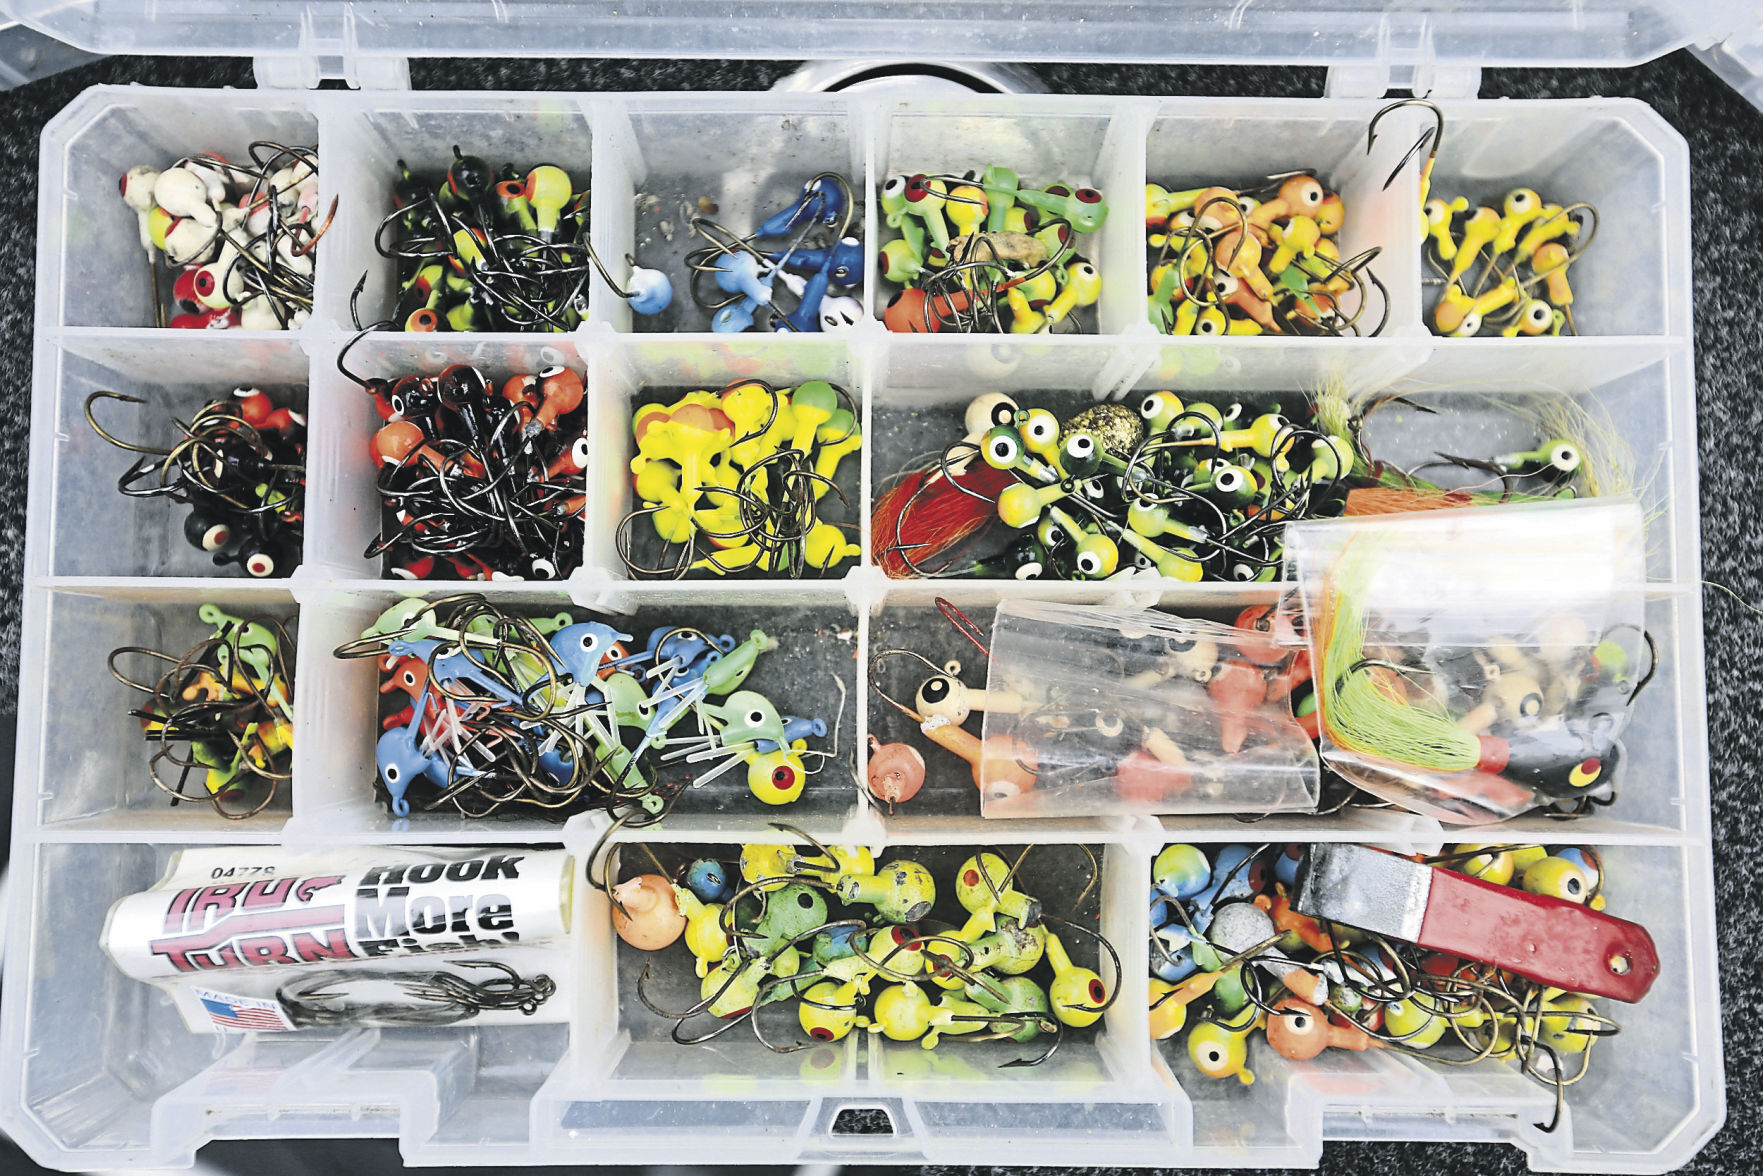 Sam Willett’s tackle box on Monday, March 22, 2021. PHOTO CREDIT: JESSICA REILLY